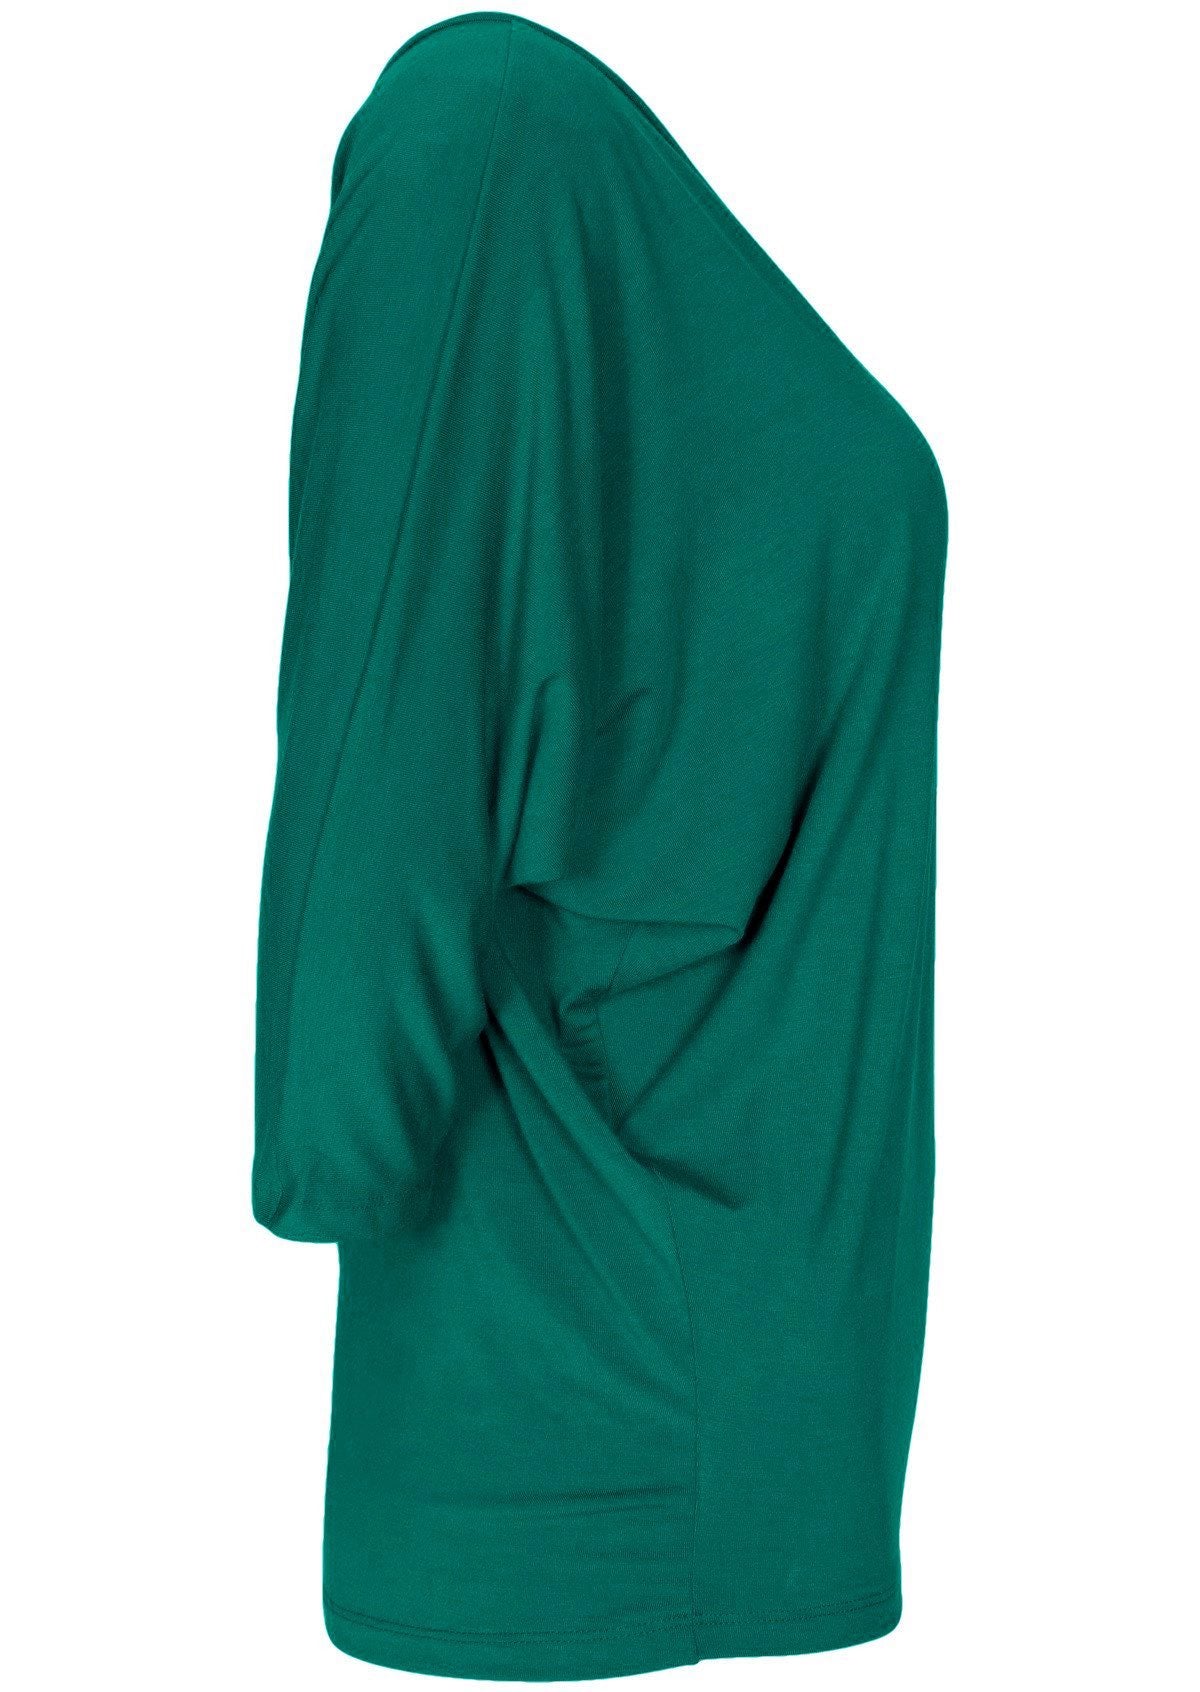 Side view women's 3/4 sleeve rayon batwing v-neck green top.